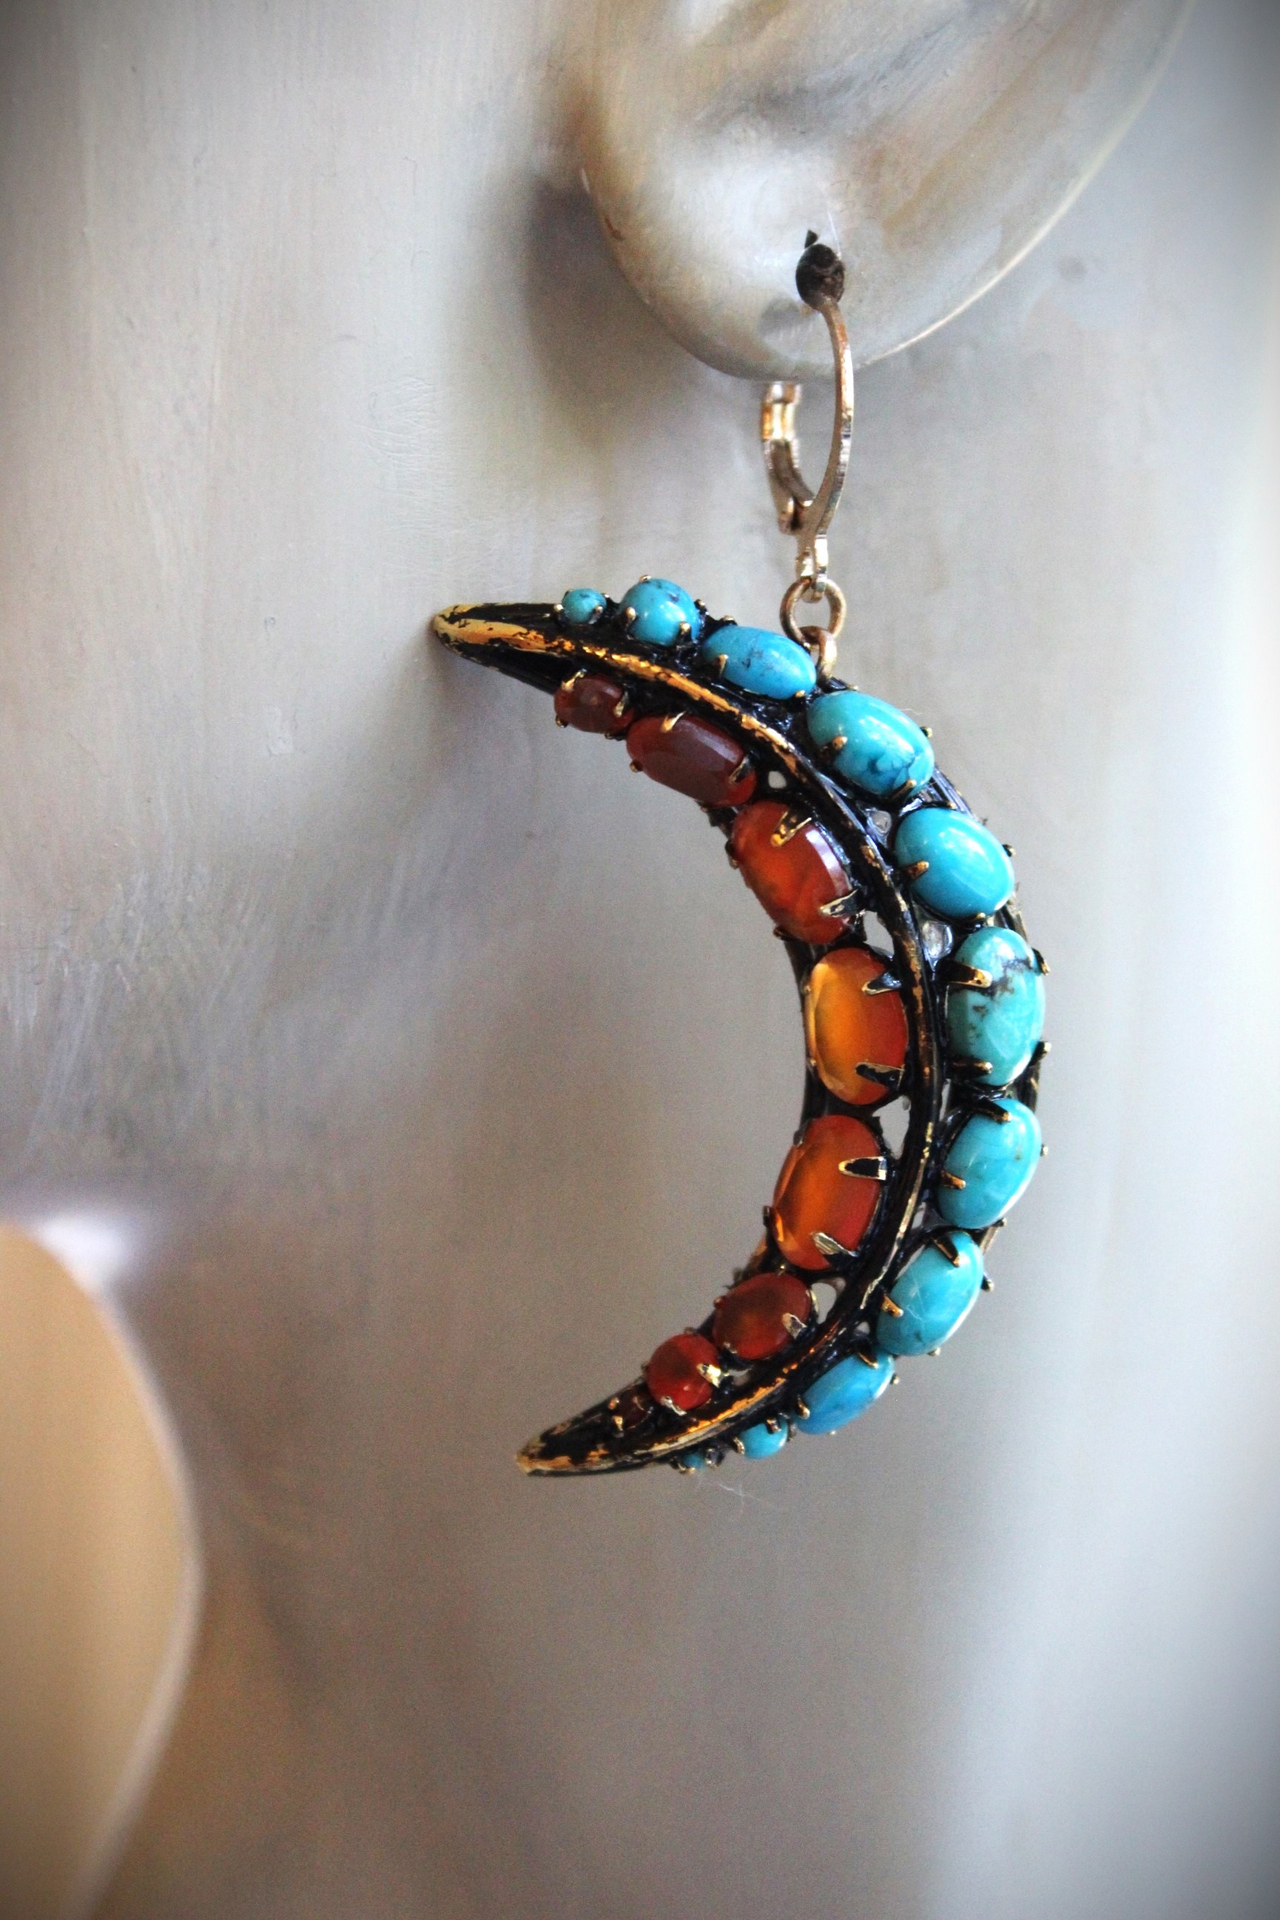 Turquoise & Carnelian Crescent Moon Earrings with Vintage Iradj Moini Findings and Leverback Earring Wires